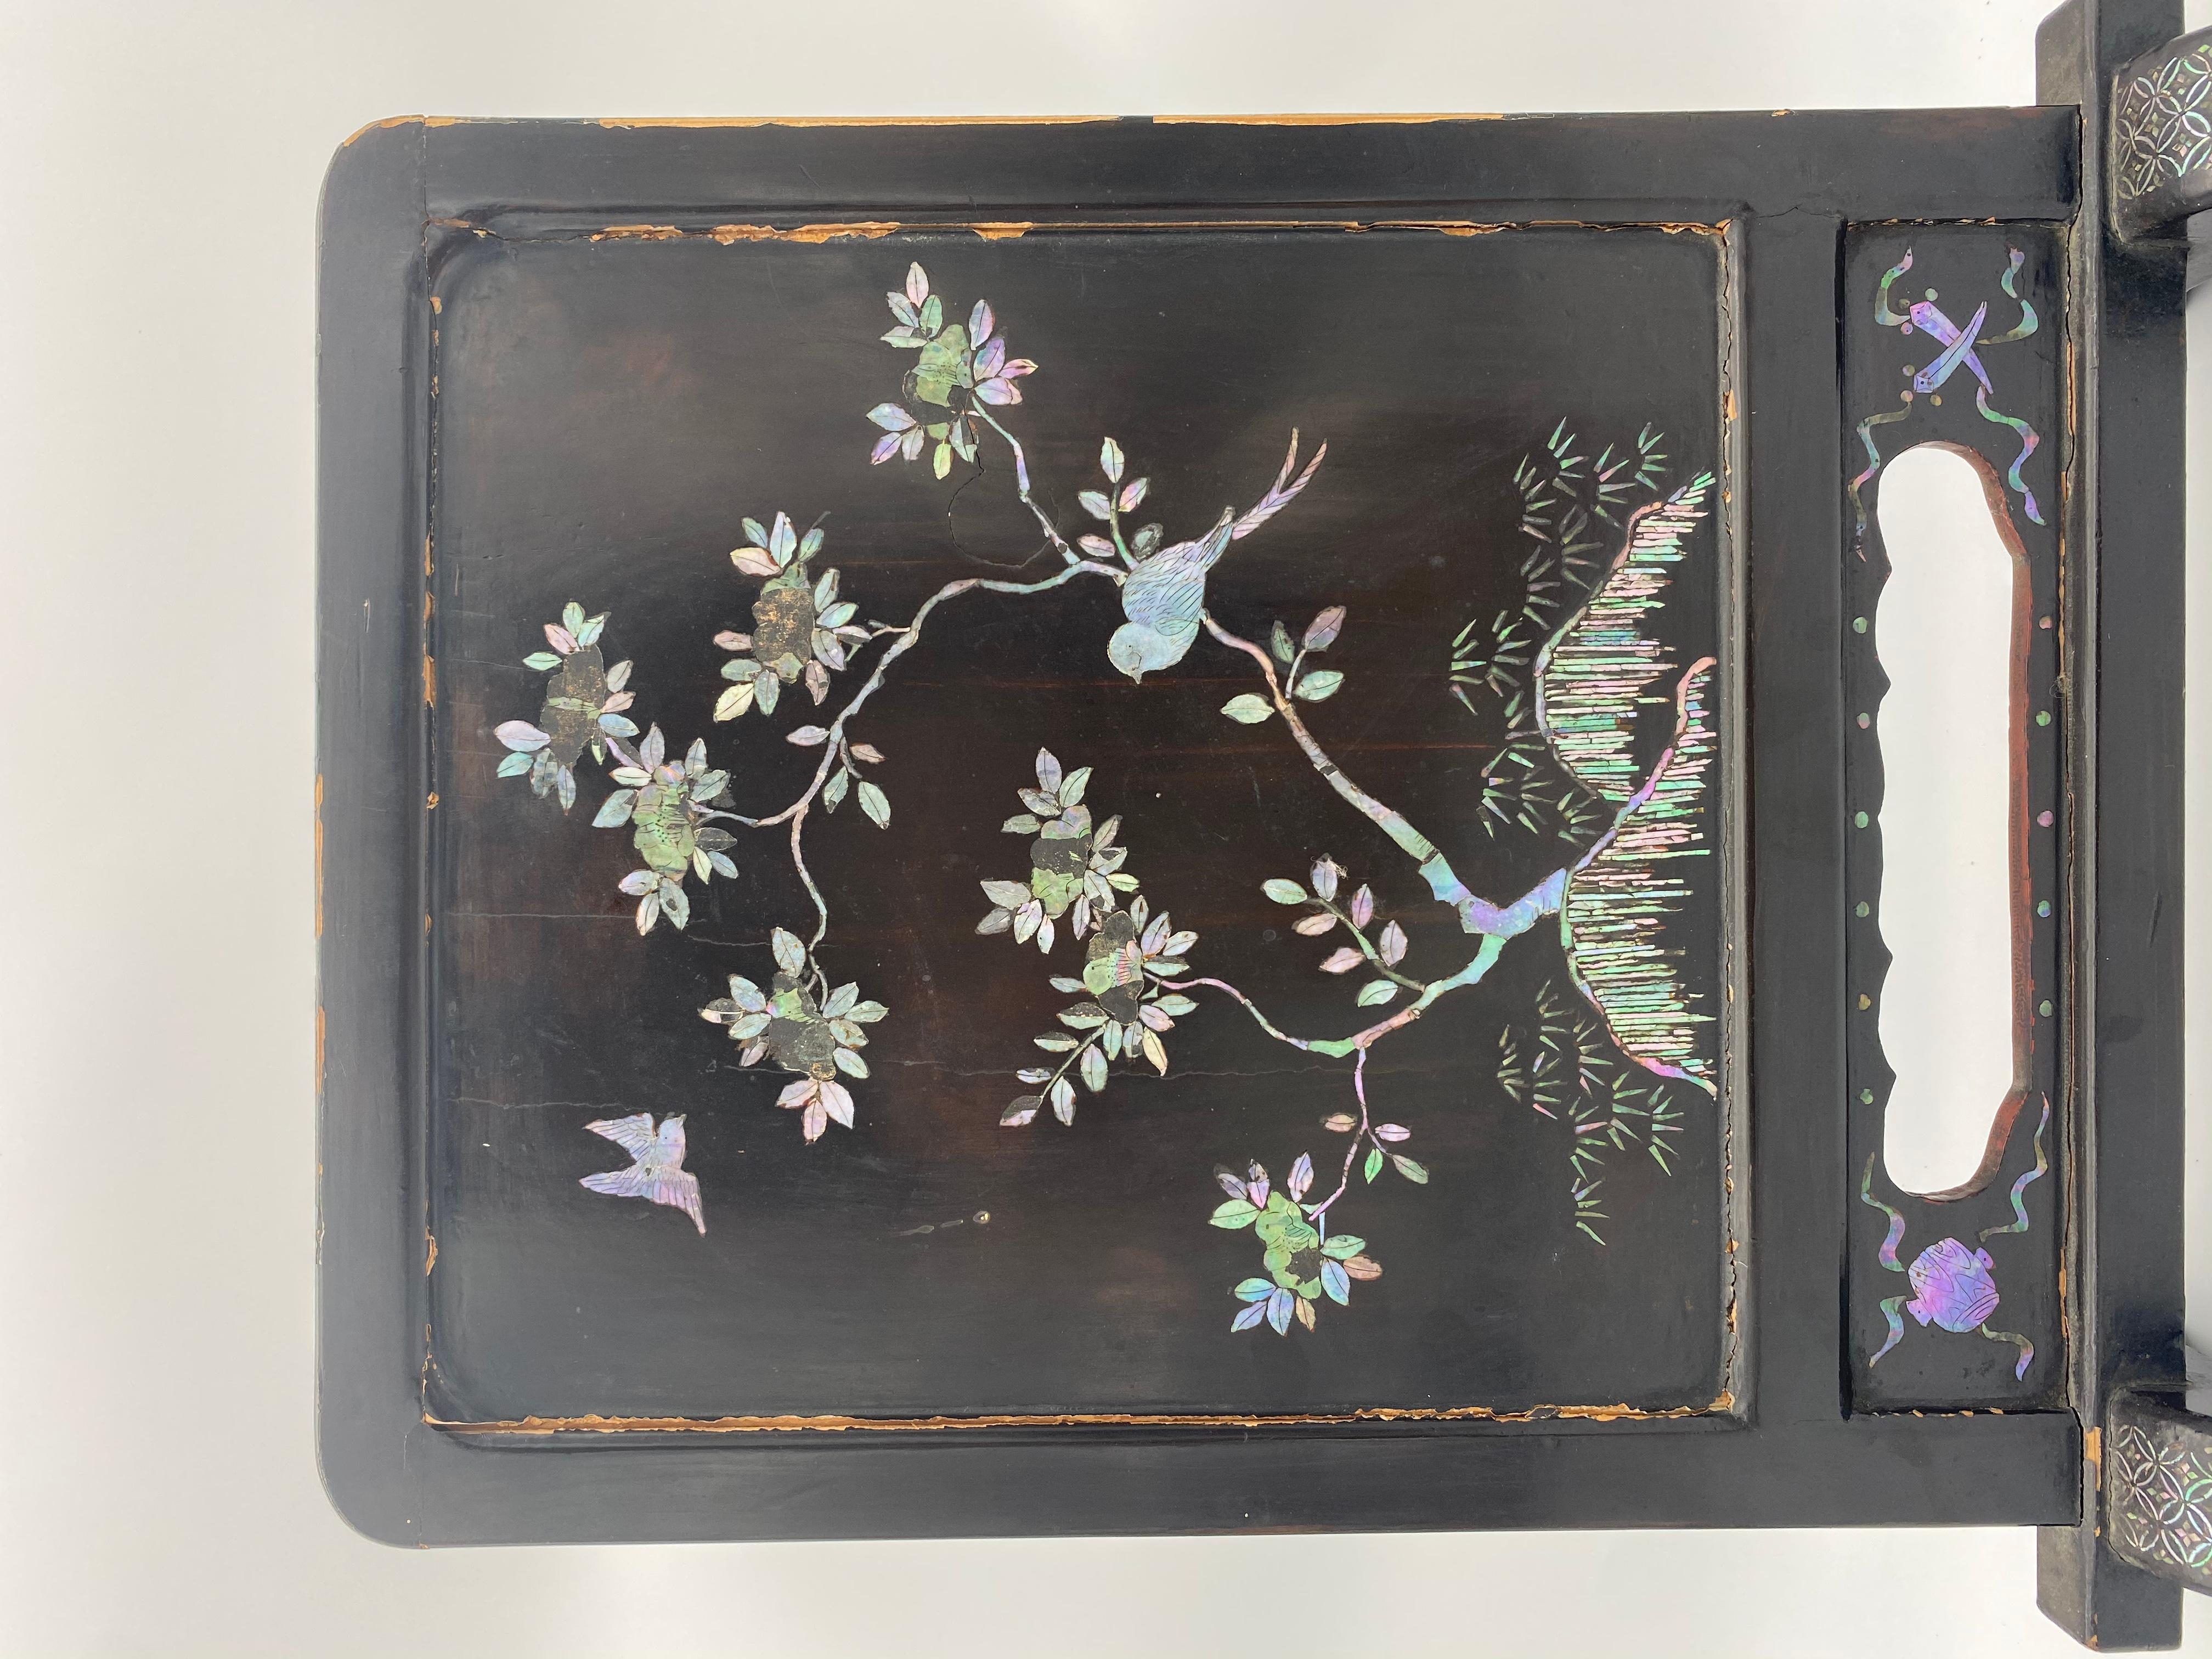 19th century Chinese lacquer mother of pearl plaque from the Qing Dynasty. Beautiful images of ancient Chinese people with floral designs and birds. Please note: some losses due to old age.